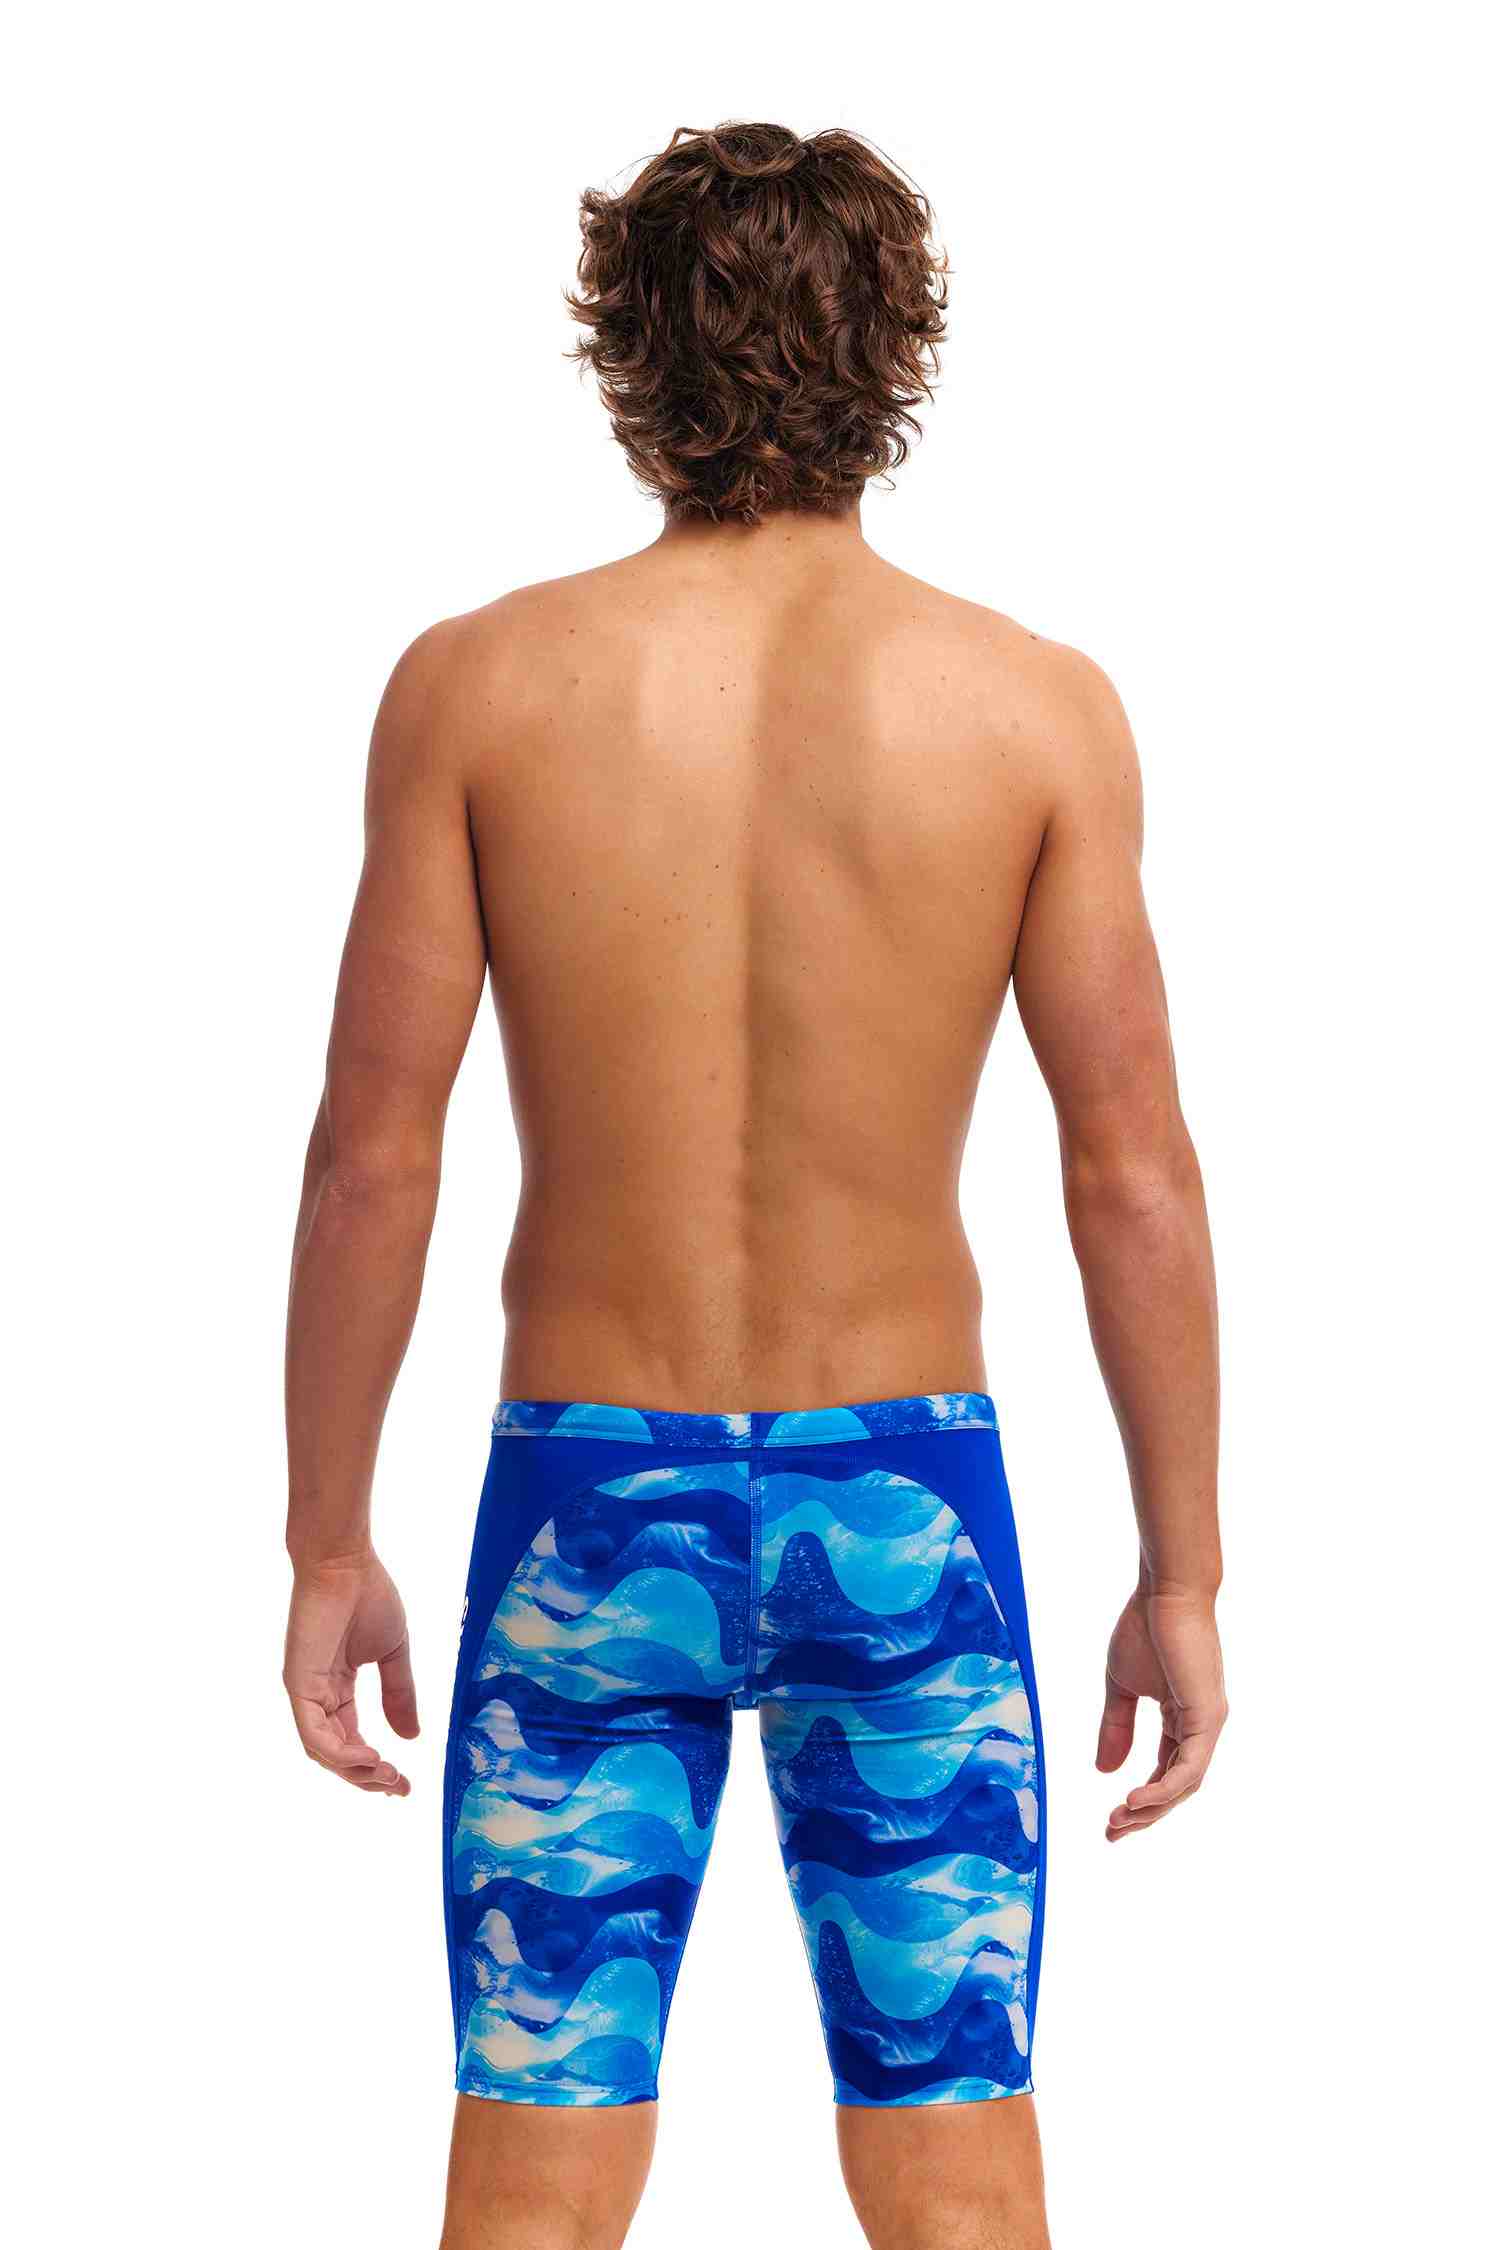 Funky Trunks Mens Training Jammers - Dive In